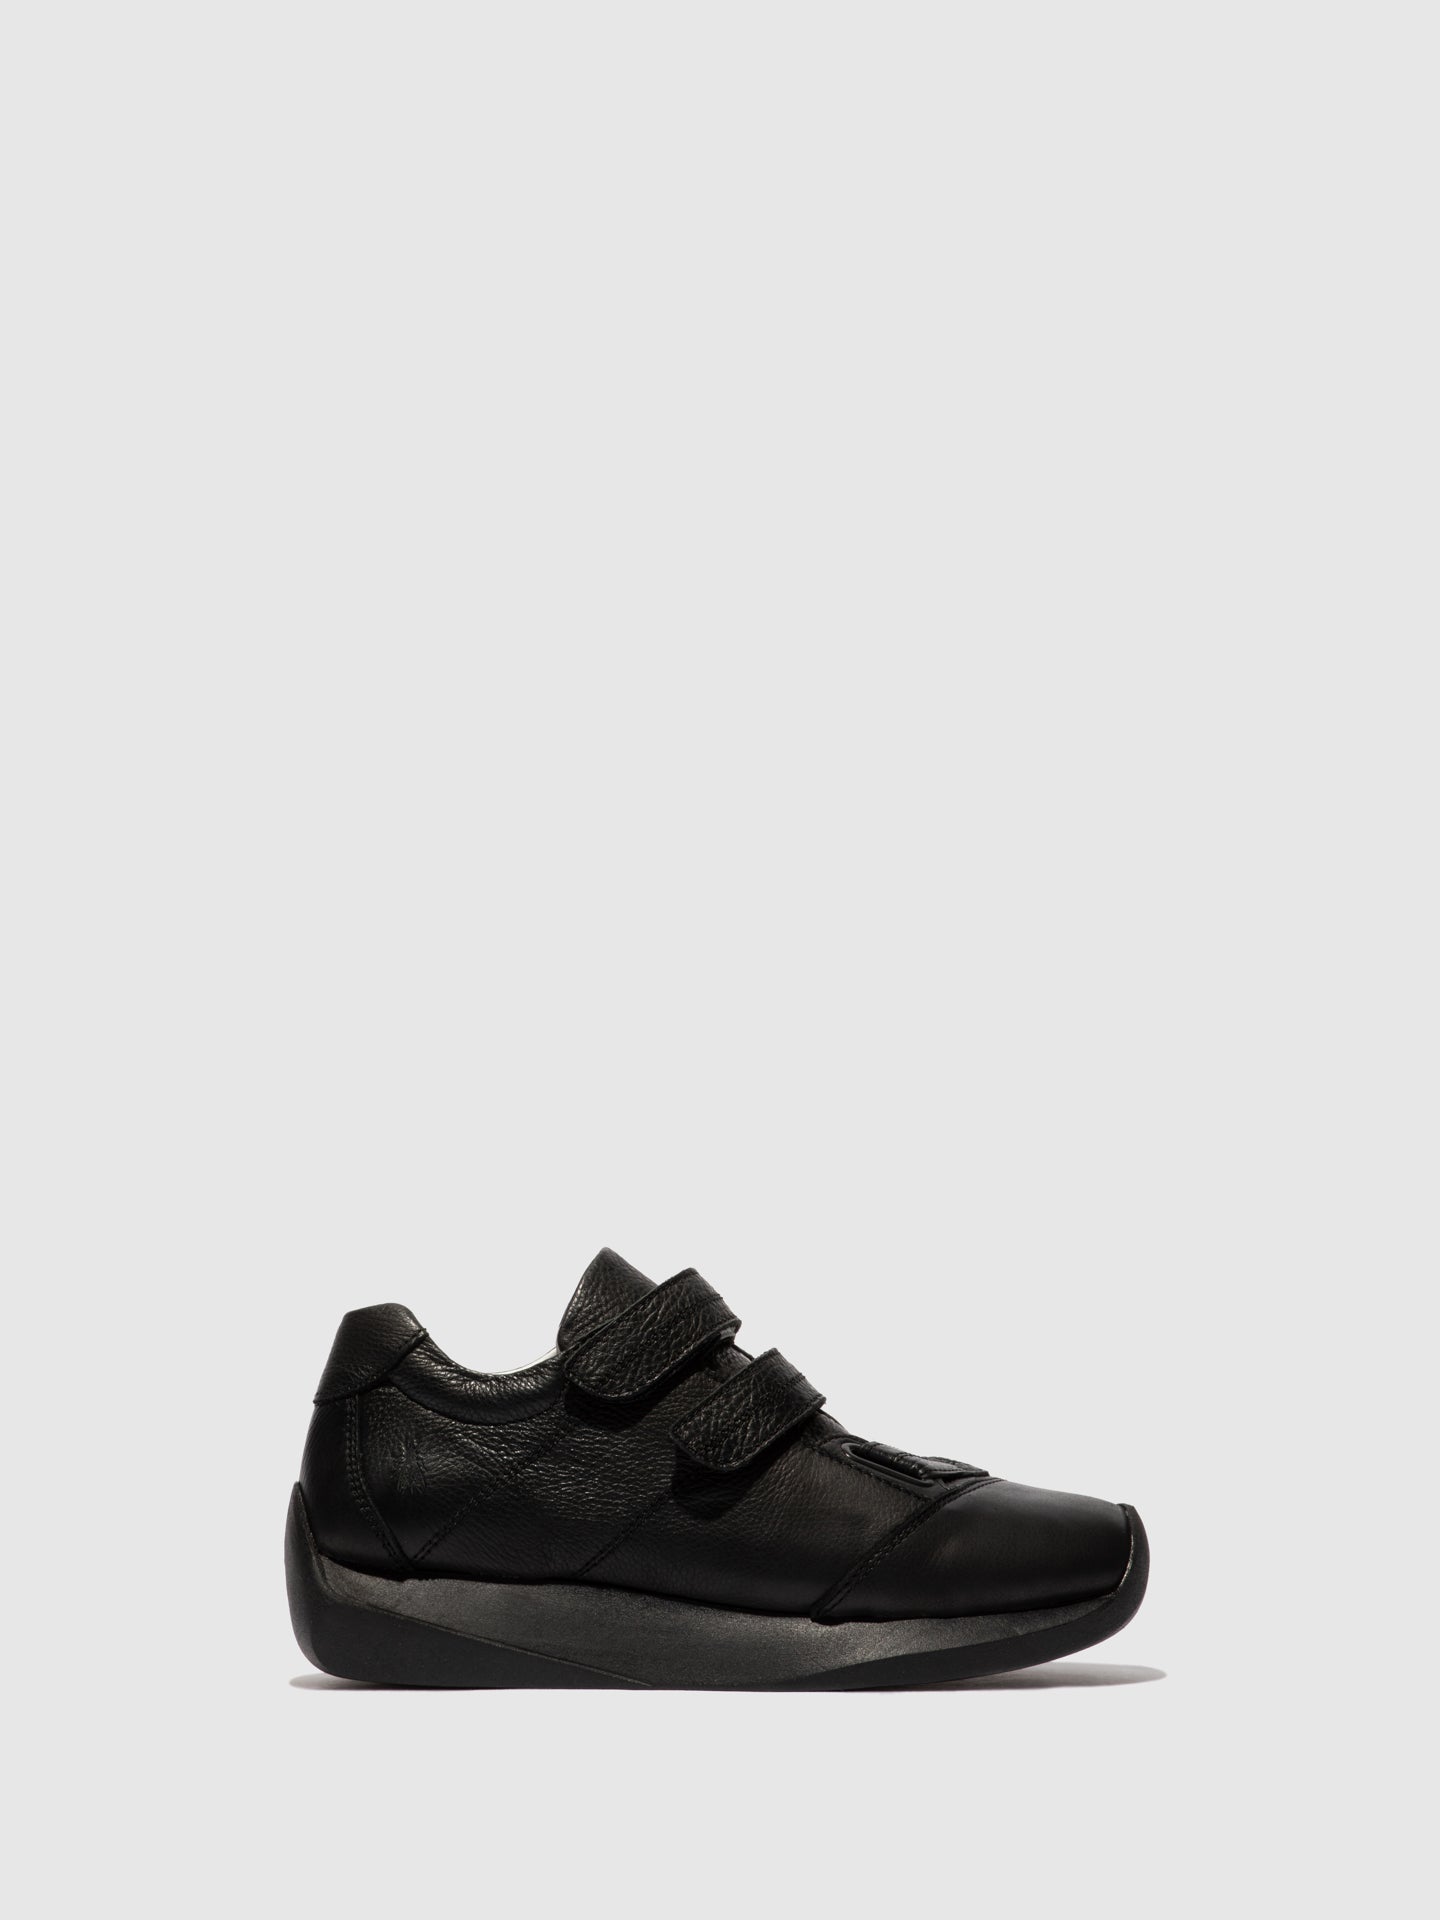 Fly London Velcro Trainers LECK732FLY BRITO BLACK